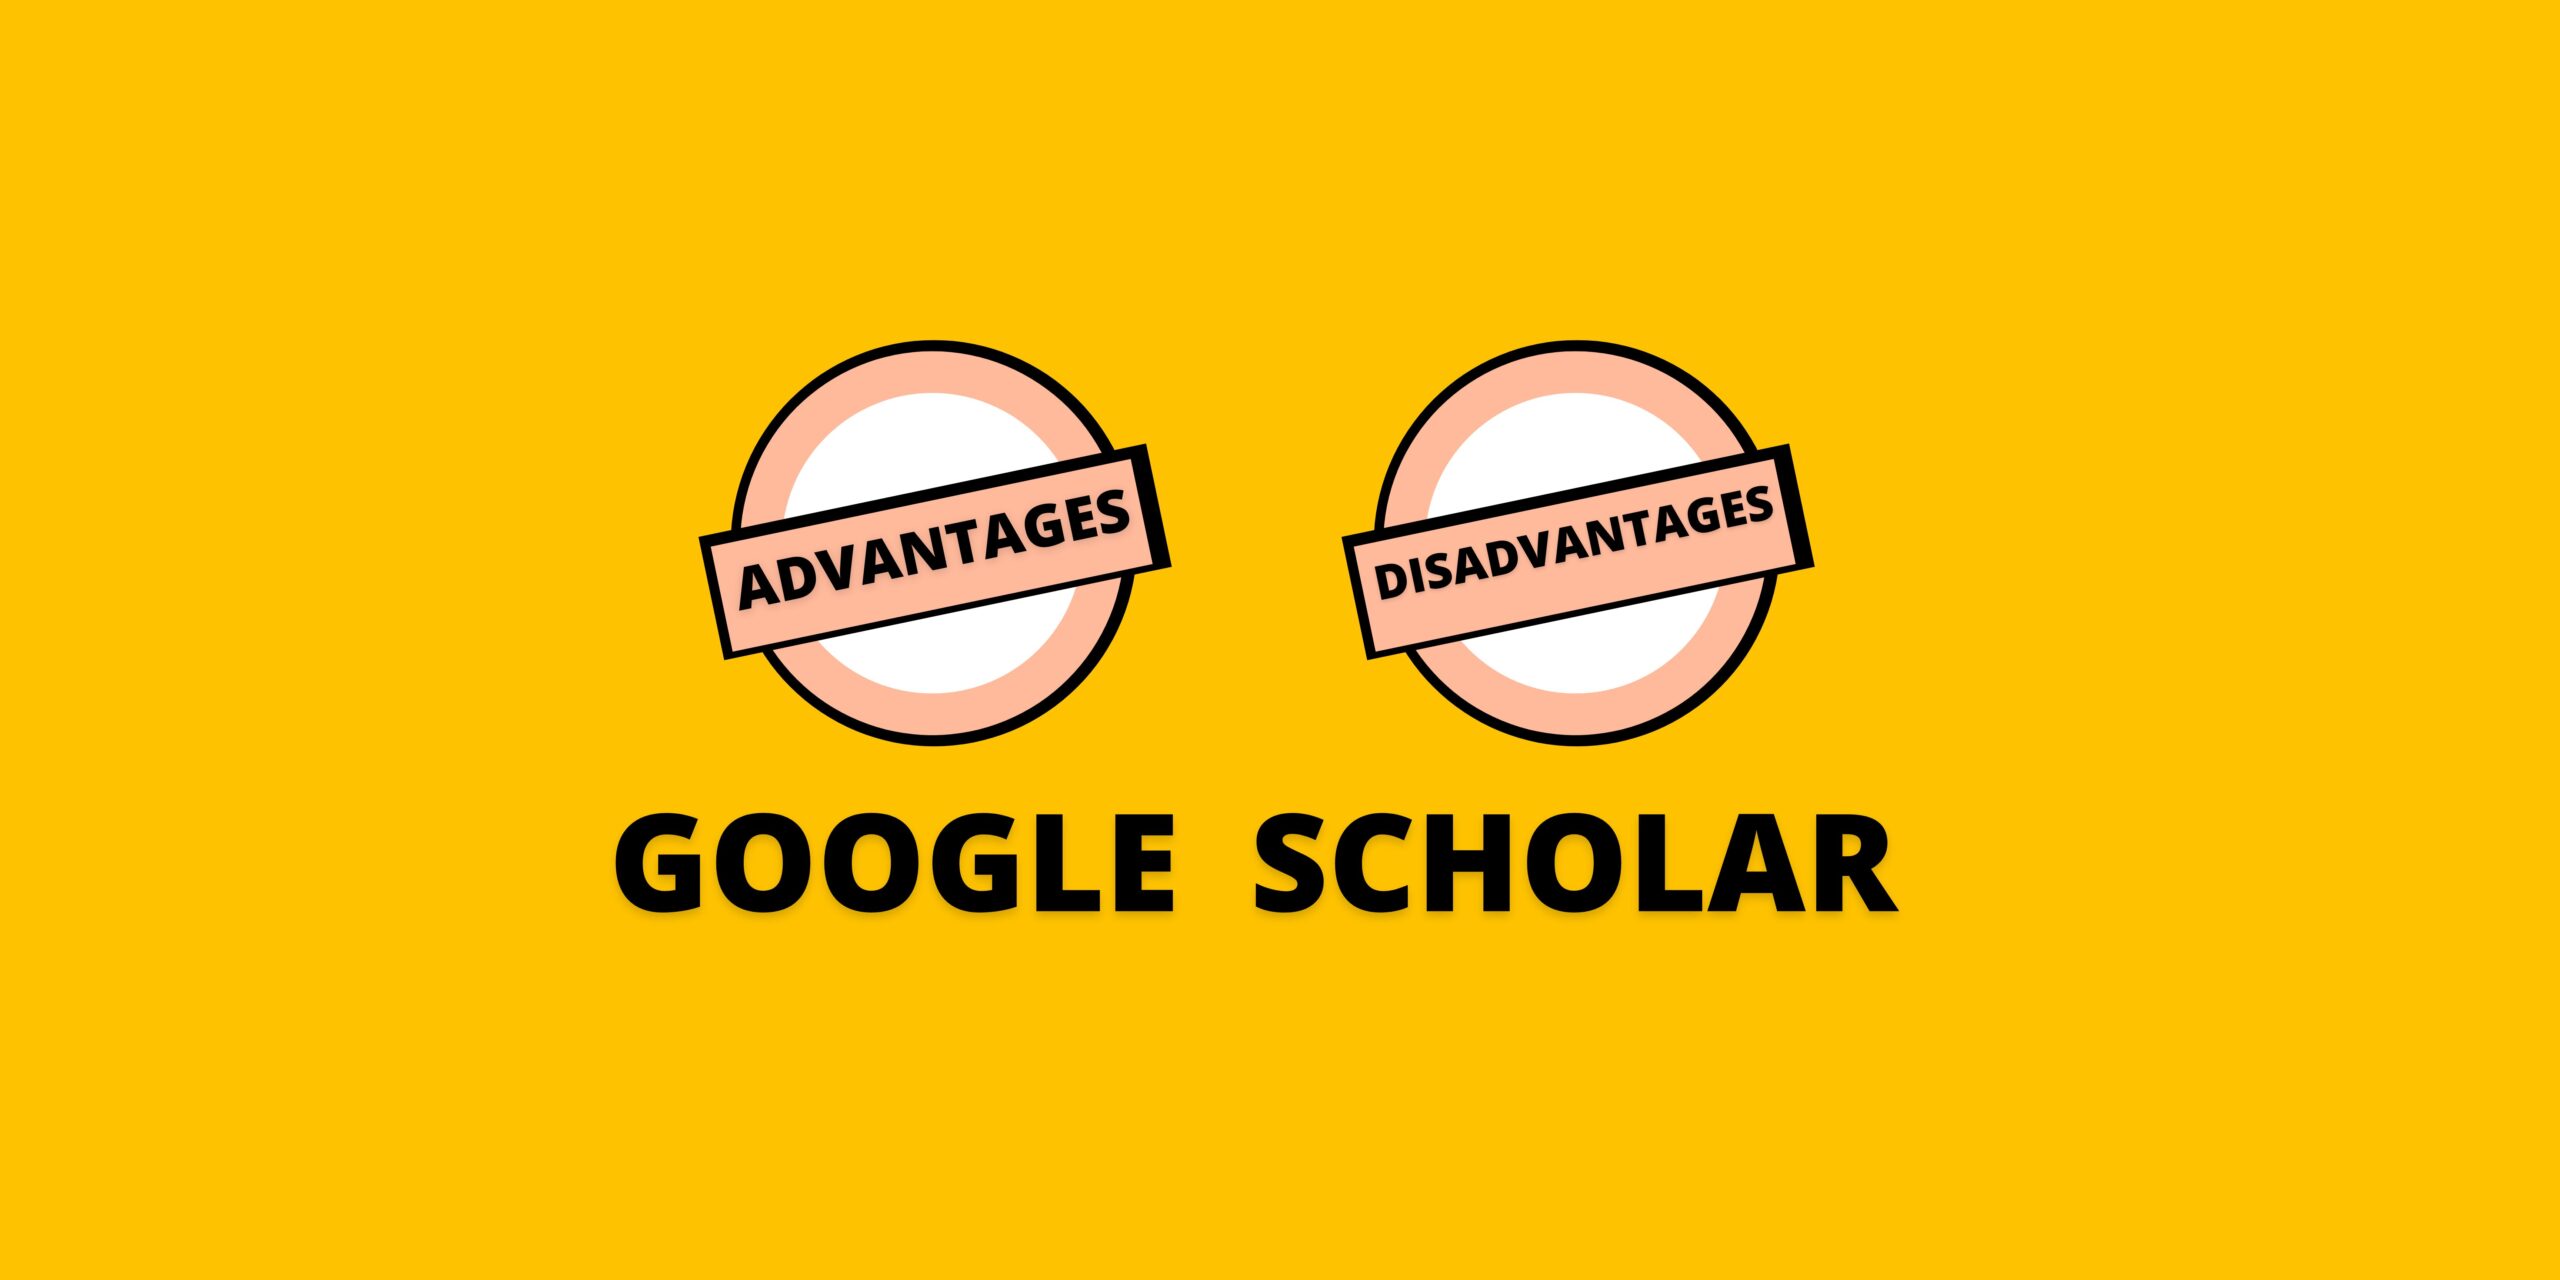 You are currently viewing Advantages and Disadvantages of Google Scholar